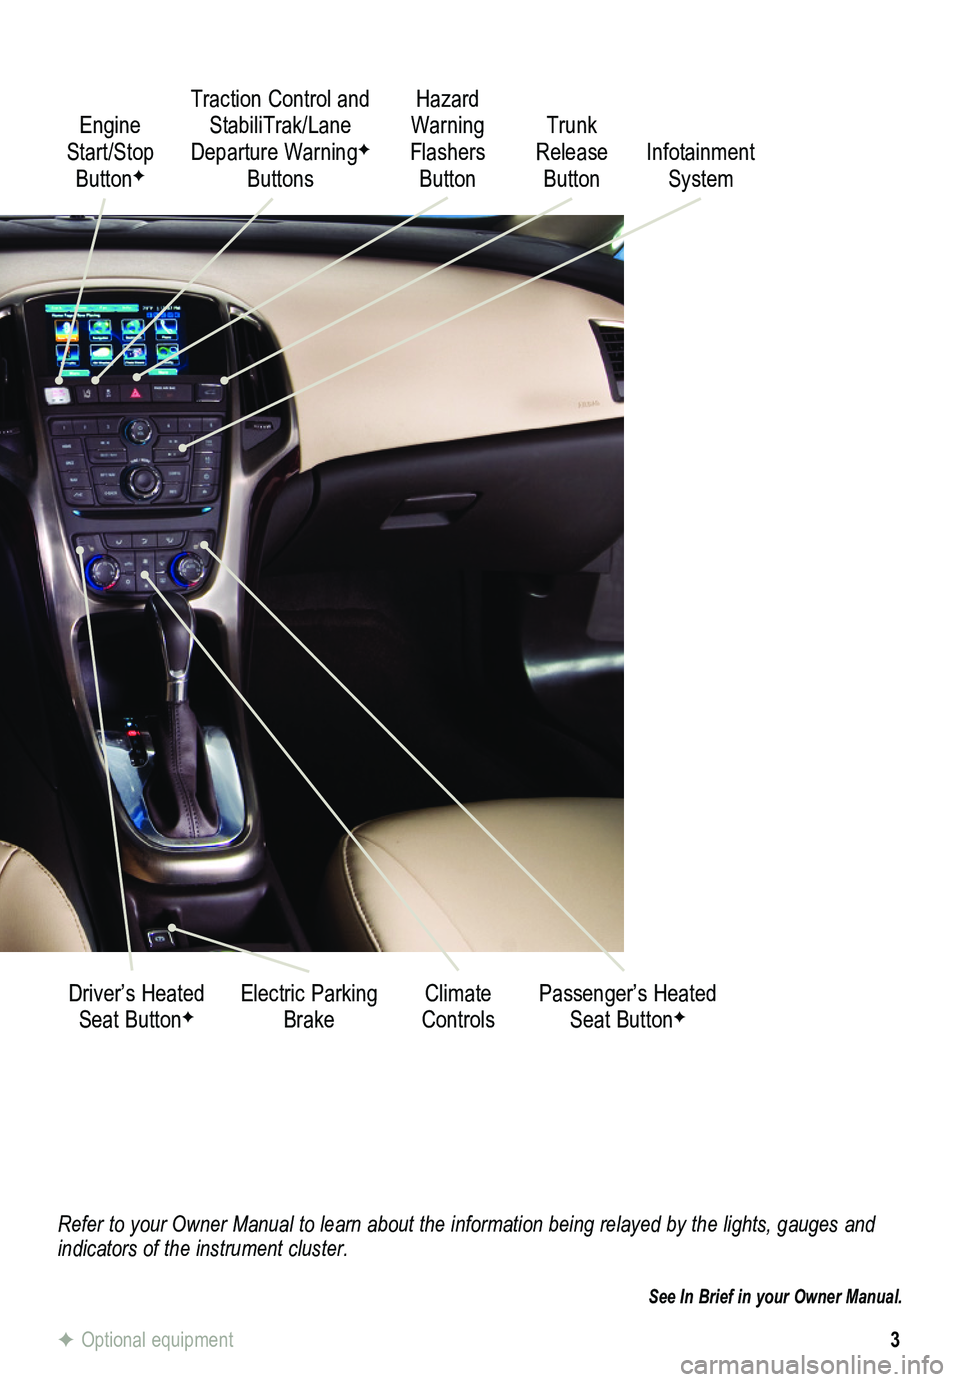 BUICK VERANO 2015  Get To Know Guide 3
Refer to your Owner Manual to learn about the information being relayed \
by the lights, gauges and indicators of the instrument cluster.
See In Brief in your Owner Manual.
Engine Start/Stop ButtonF